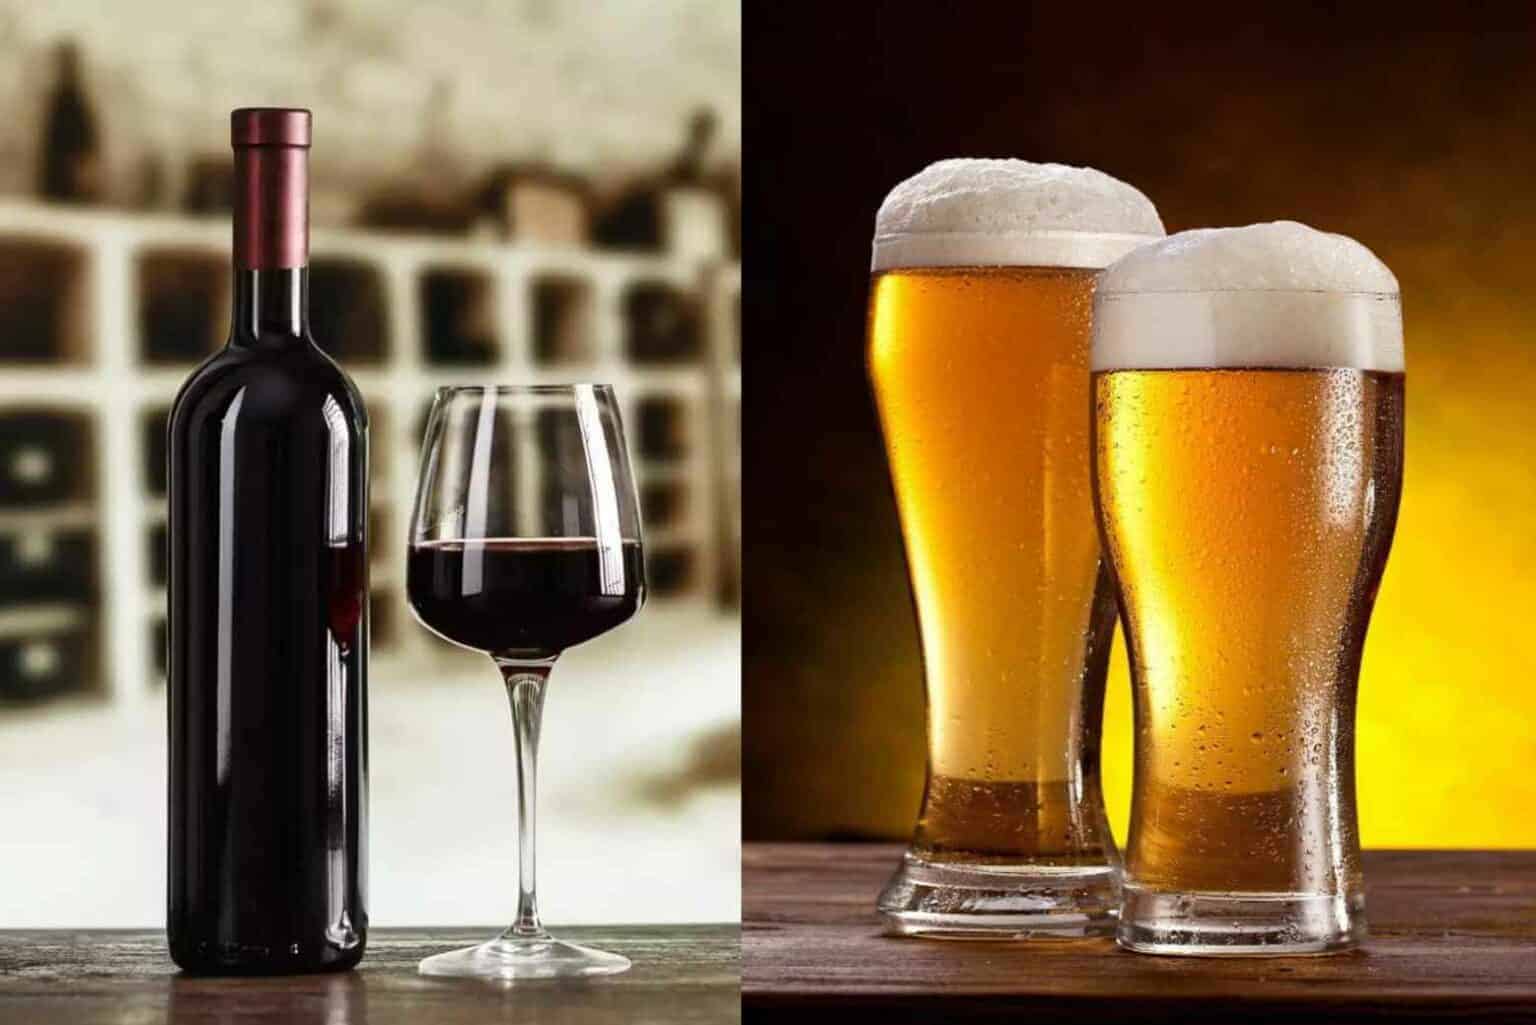 Why Strong Beer is Served in a Smaller Glass